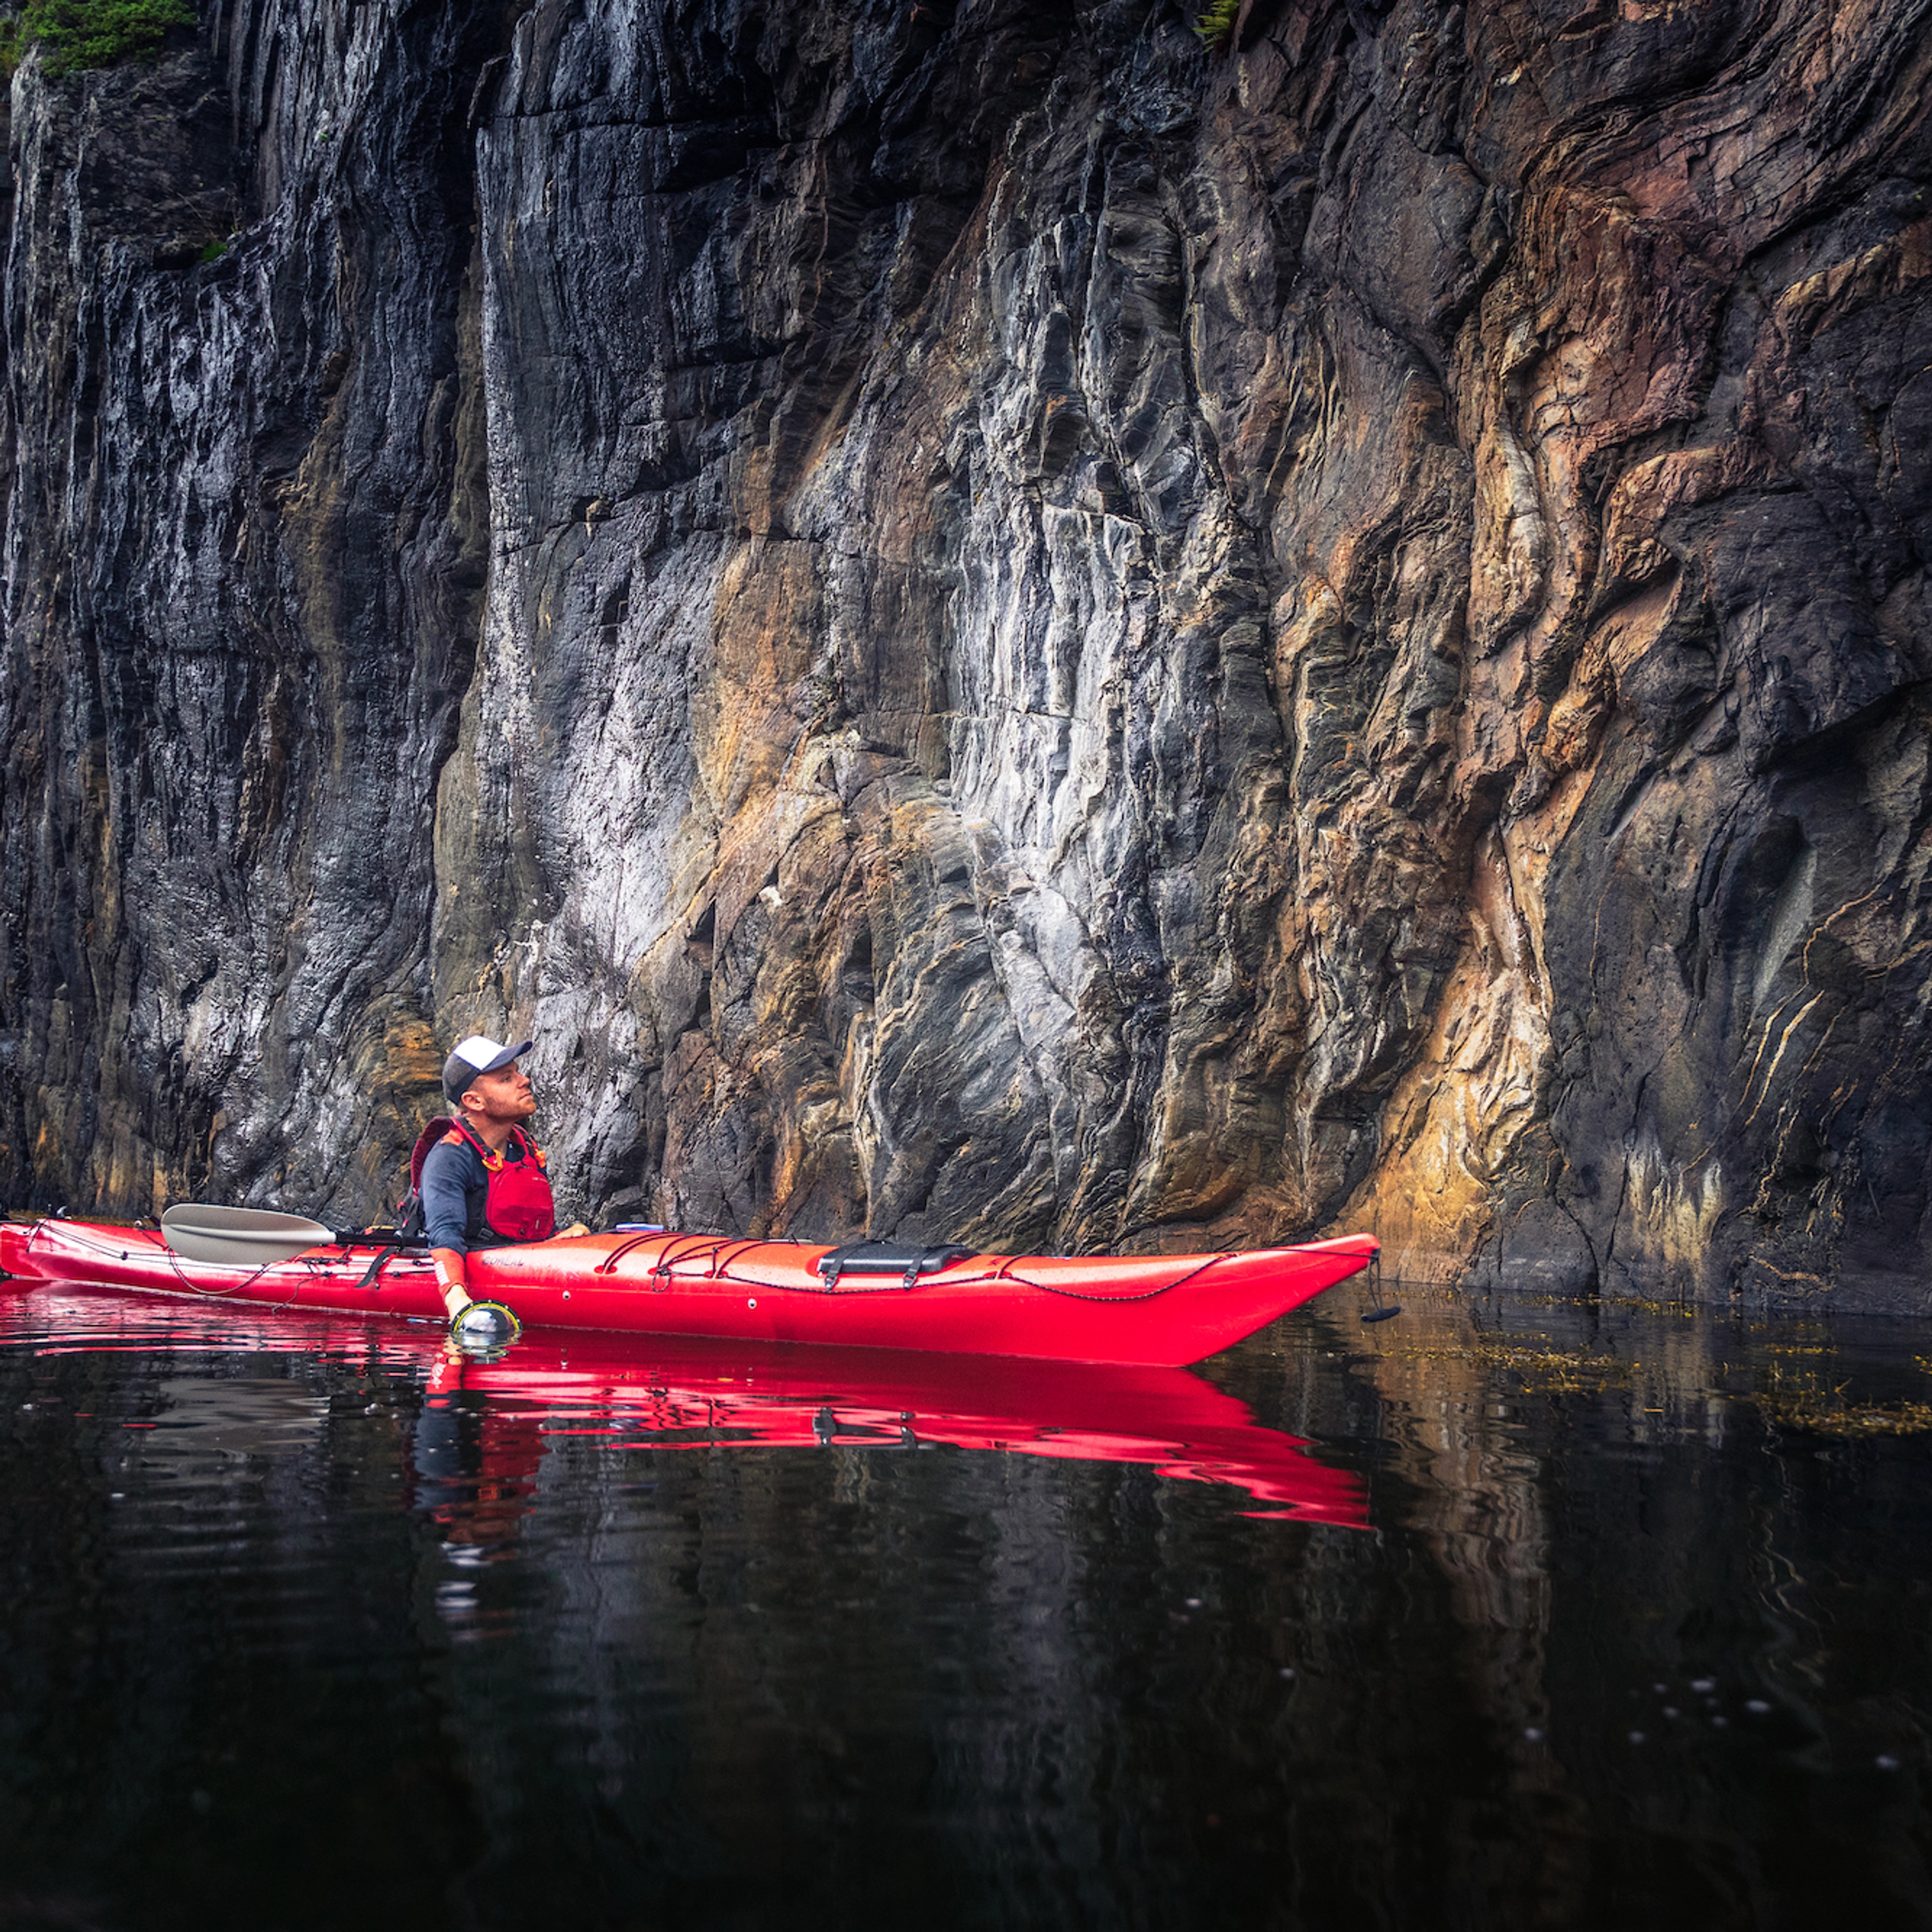 A nice day on the water - Kayak trip in Bergen, Norway